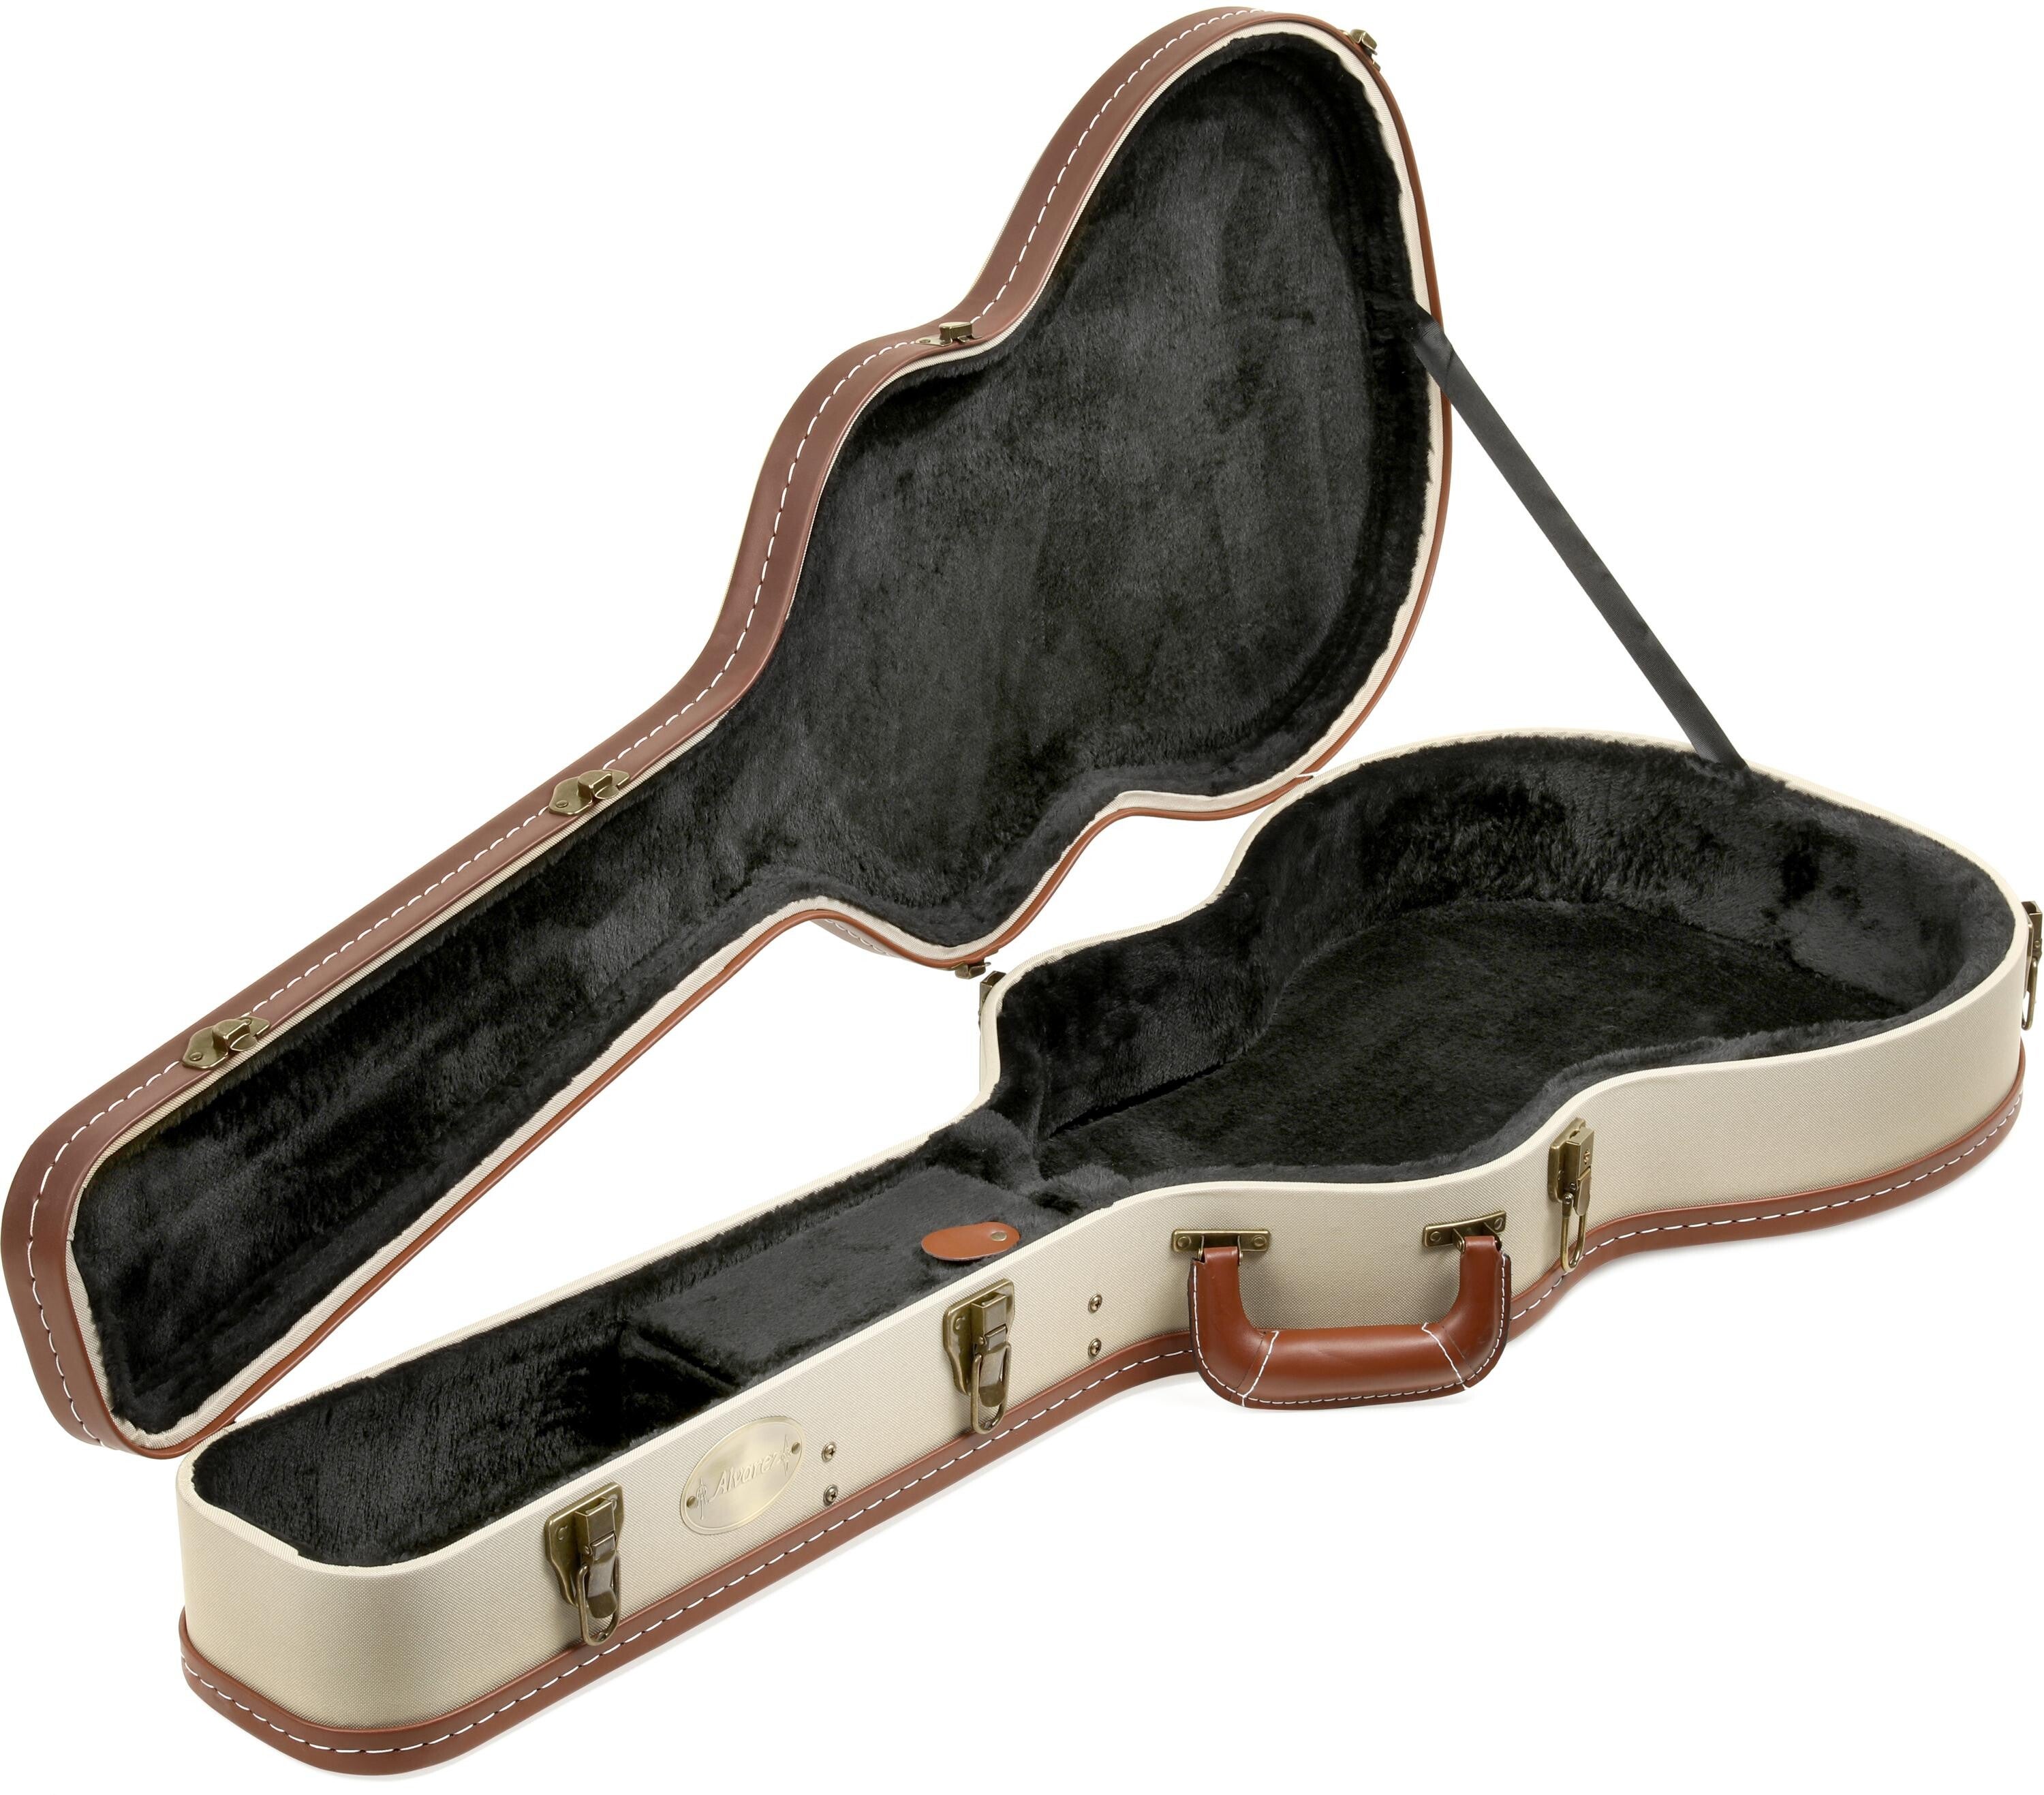 PC-1 Deluxe Wood Case for Parlor Guitar - Sweetwater